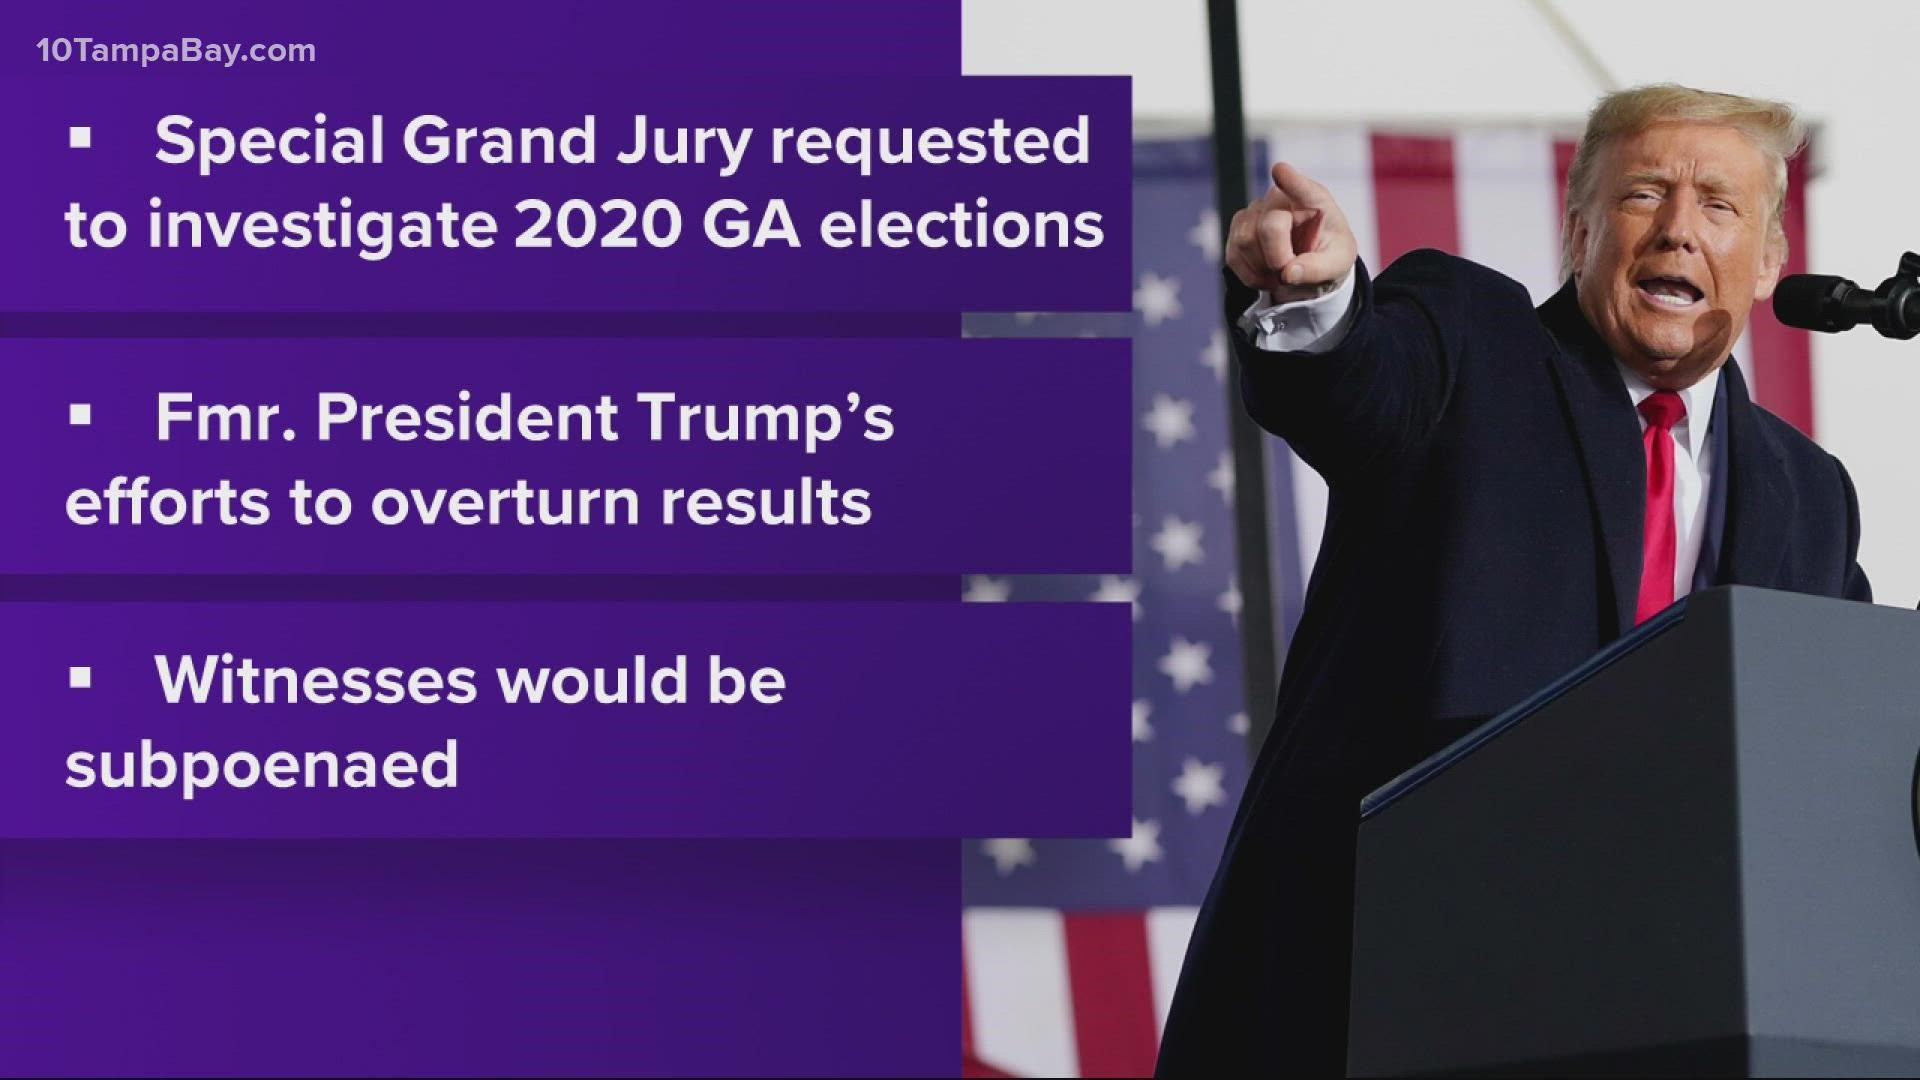 Fulton County District Attorney Fani Willis has been investigating the former president's efforts to overturn Georgia's 2020 election results.